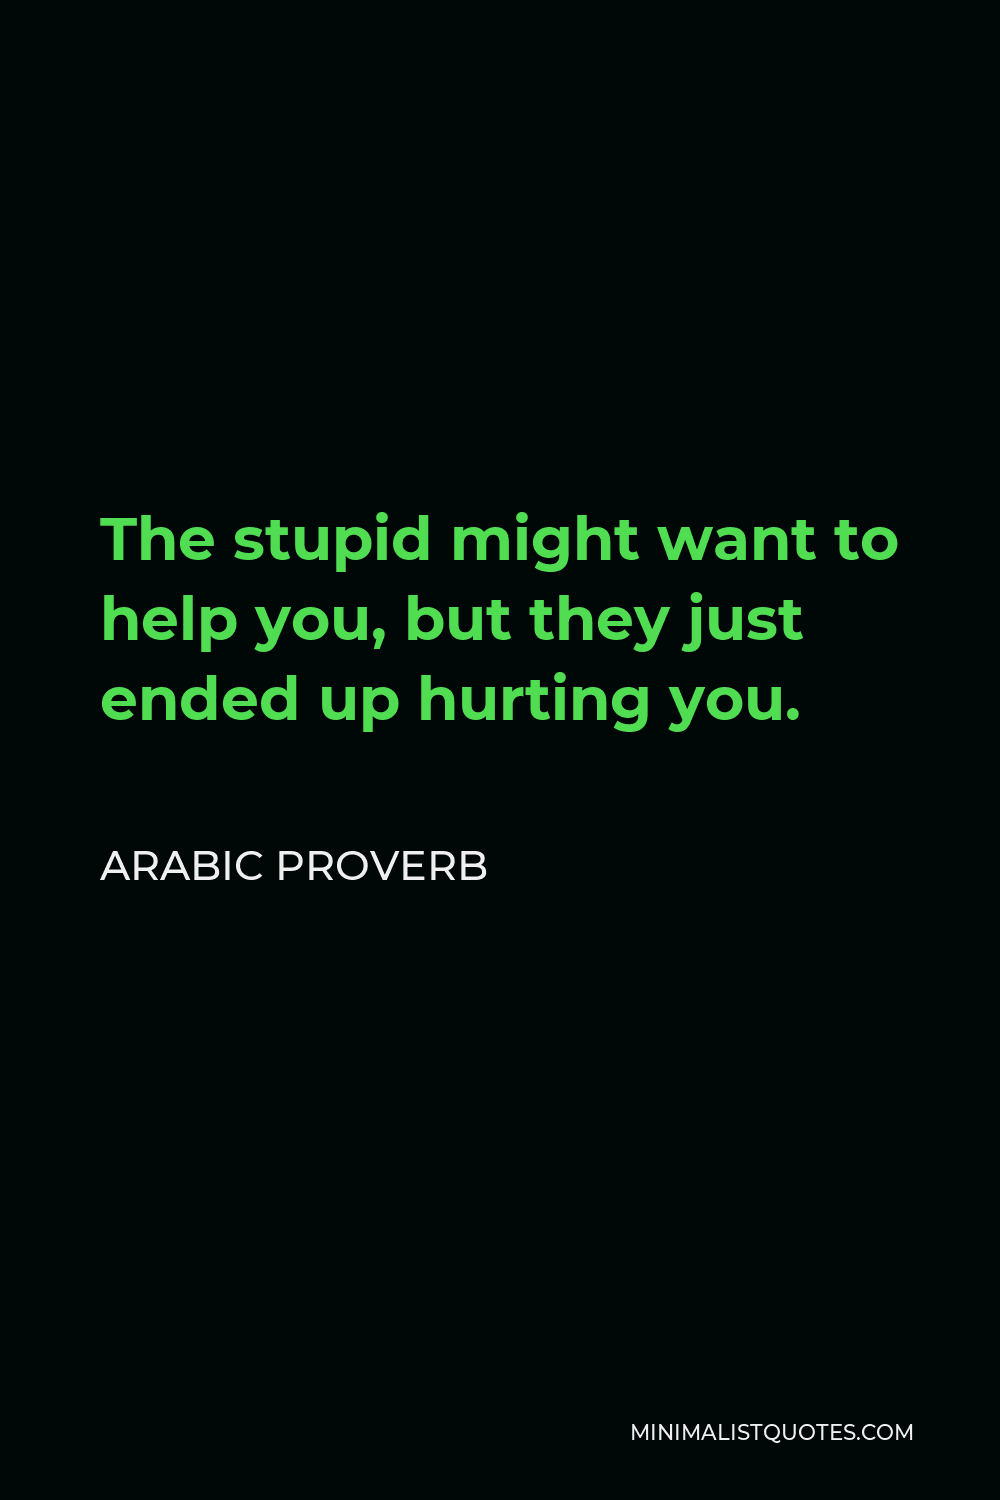 Arabic Proverb Quote - The stupid might want to help you, but they just ended up hurting you.